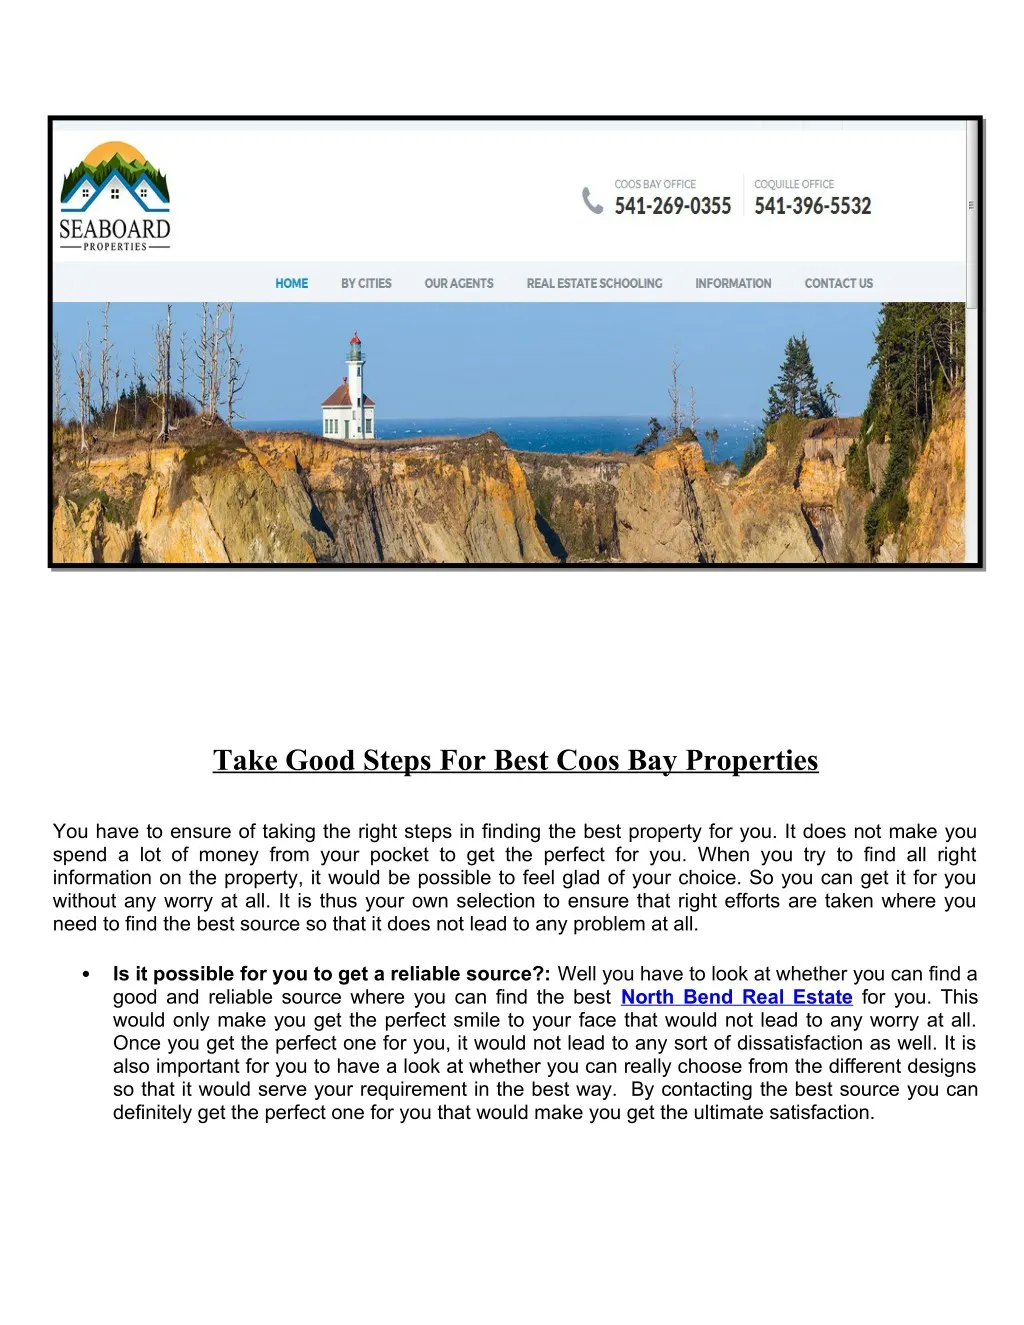 take good steps for best coos bay properties